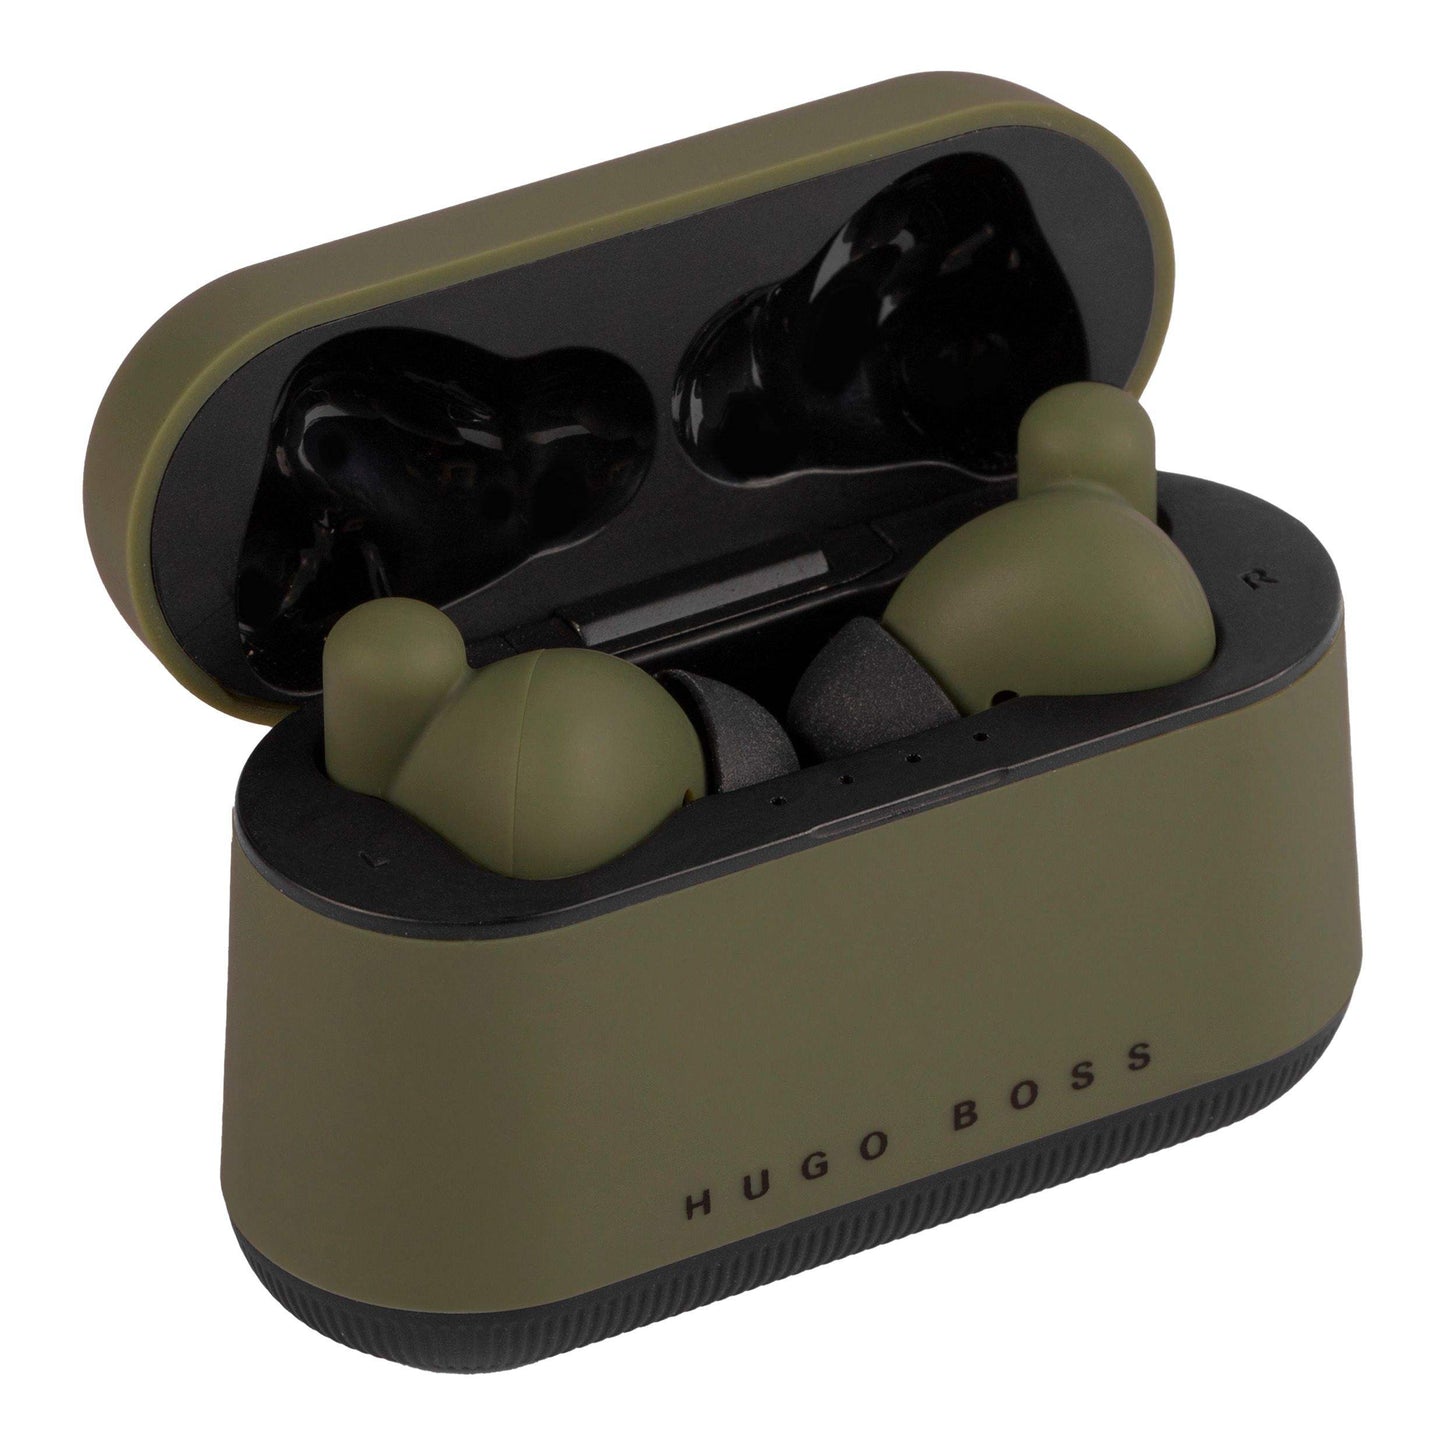 Hugo Boss Gear Matrix Earbuds - The Luxury Promotional Gifts Company Limited